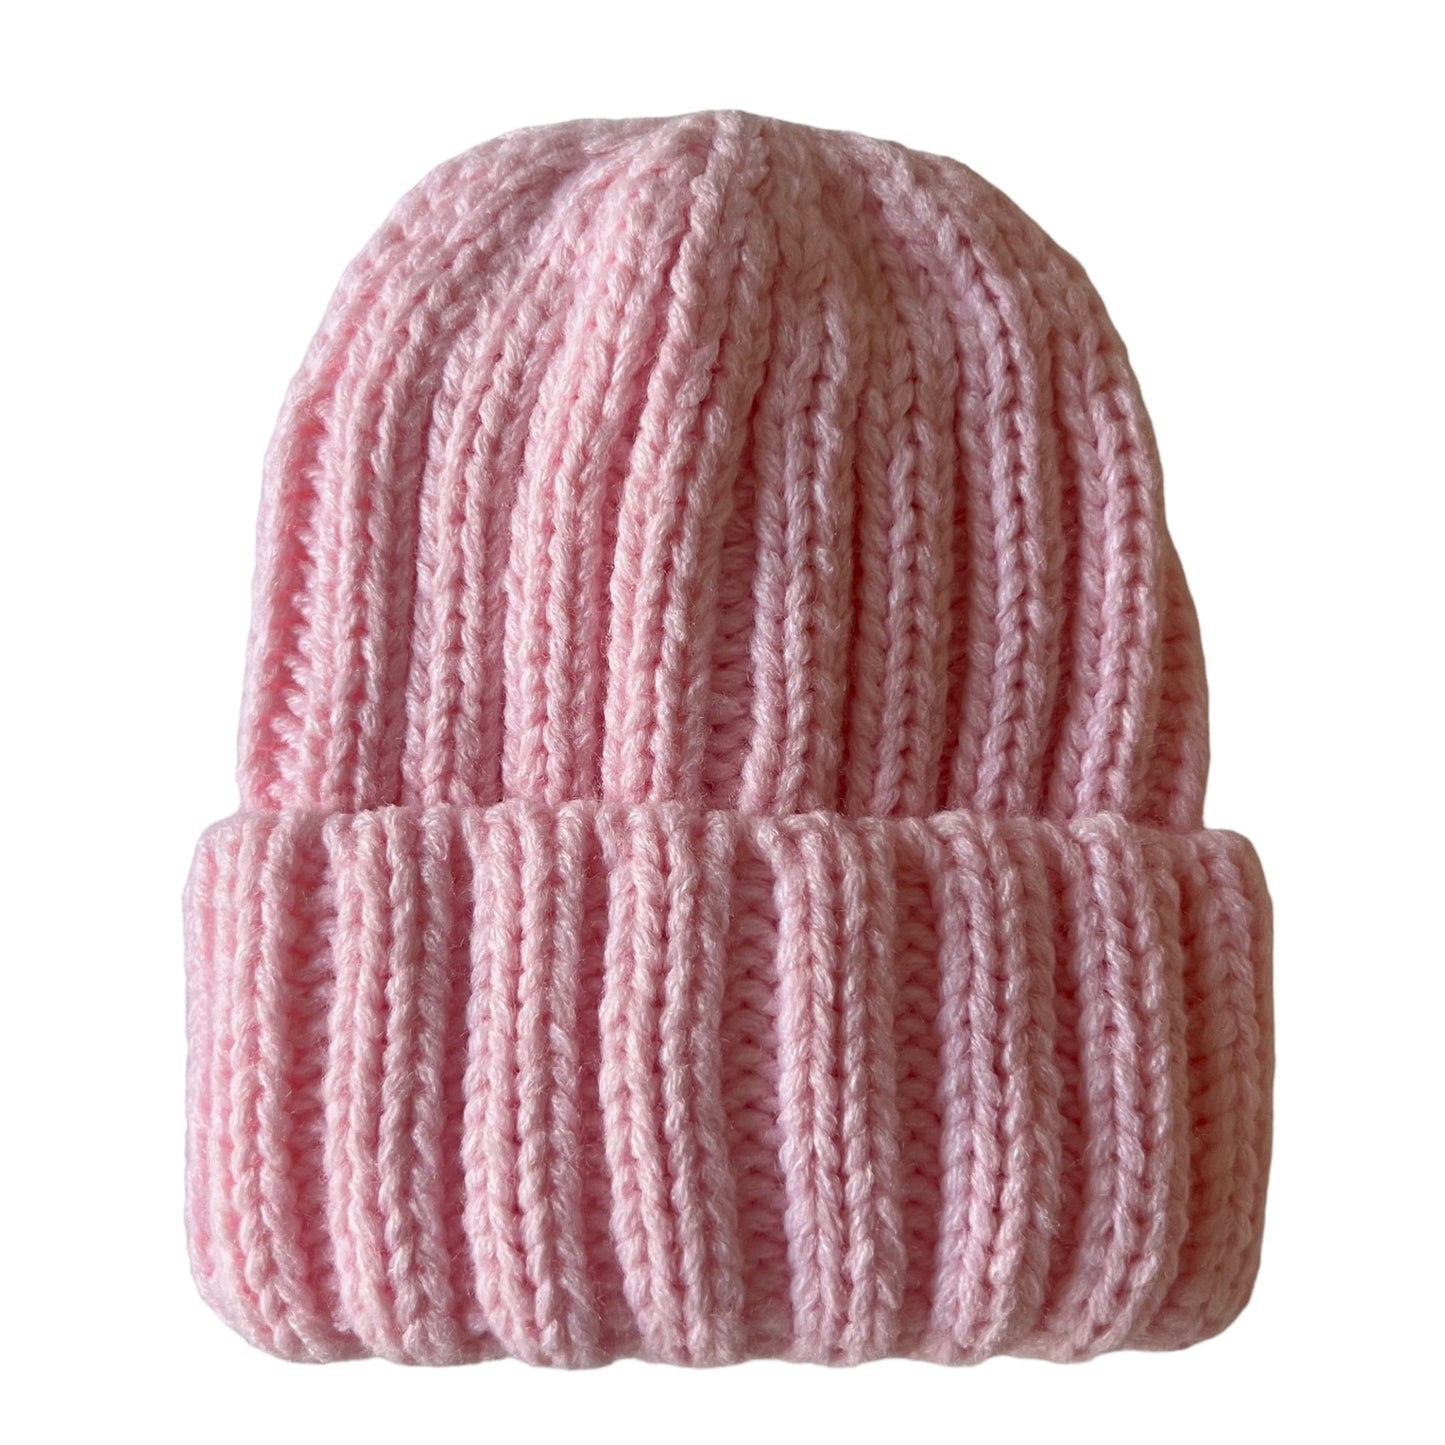 Baby's First Hat, Chunky Knit Pink Sugar